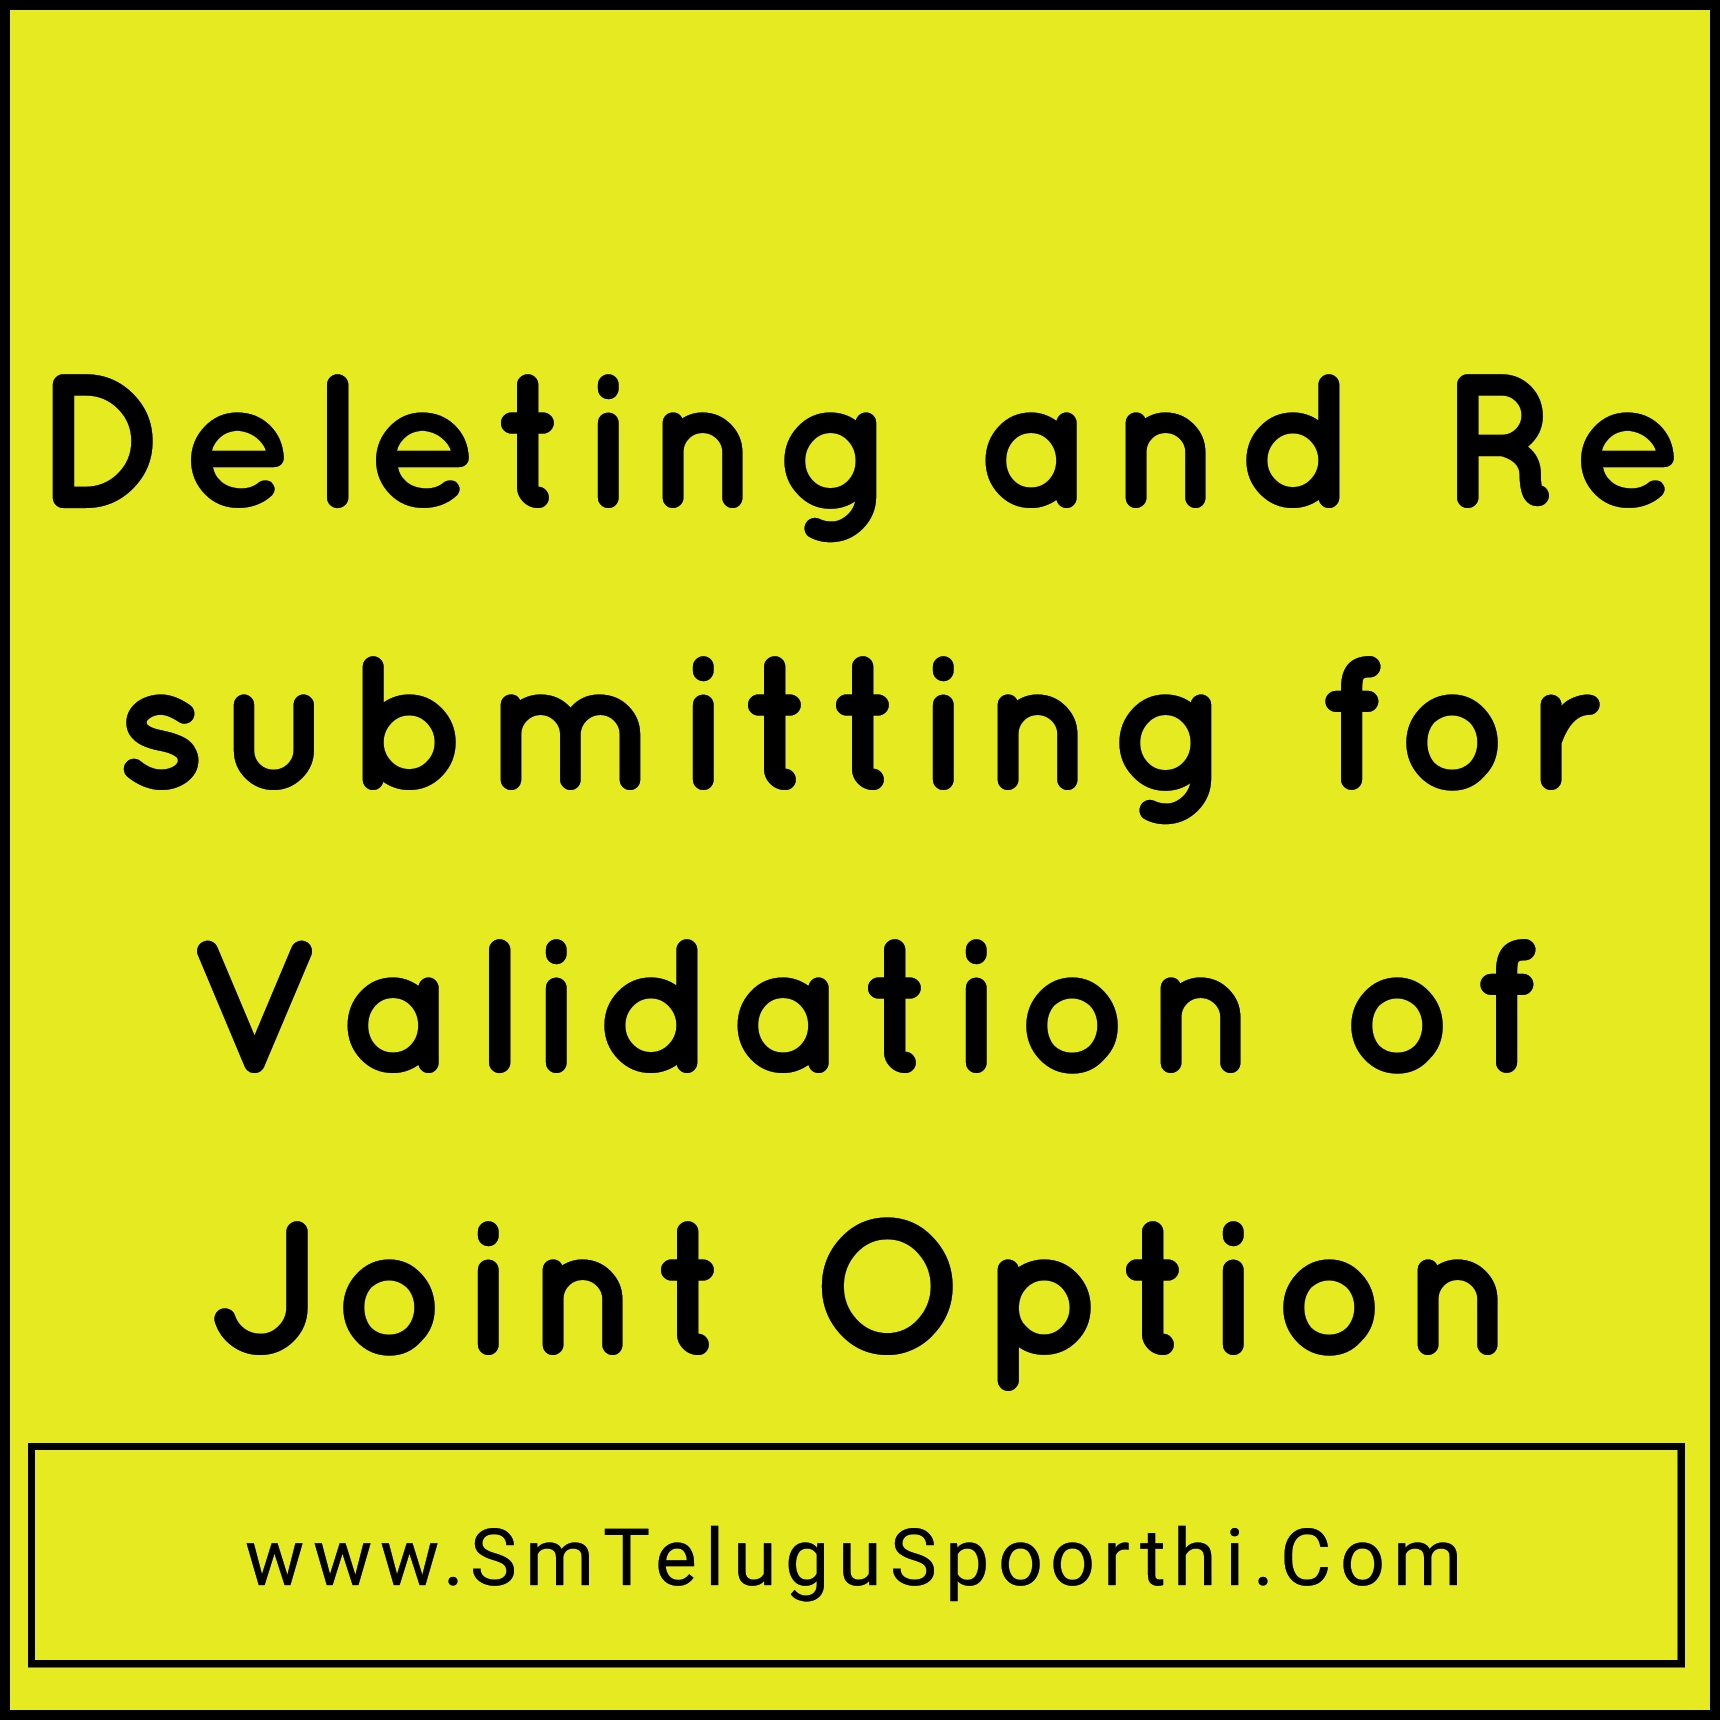 Deleting and Re submitting for Validation of Joint Option